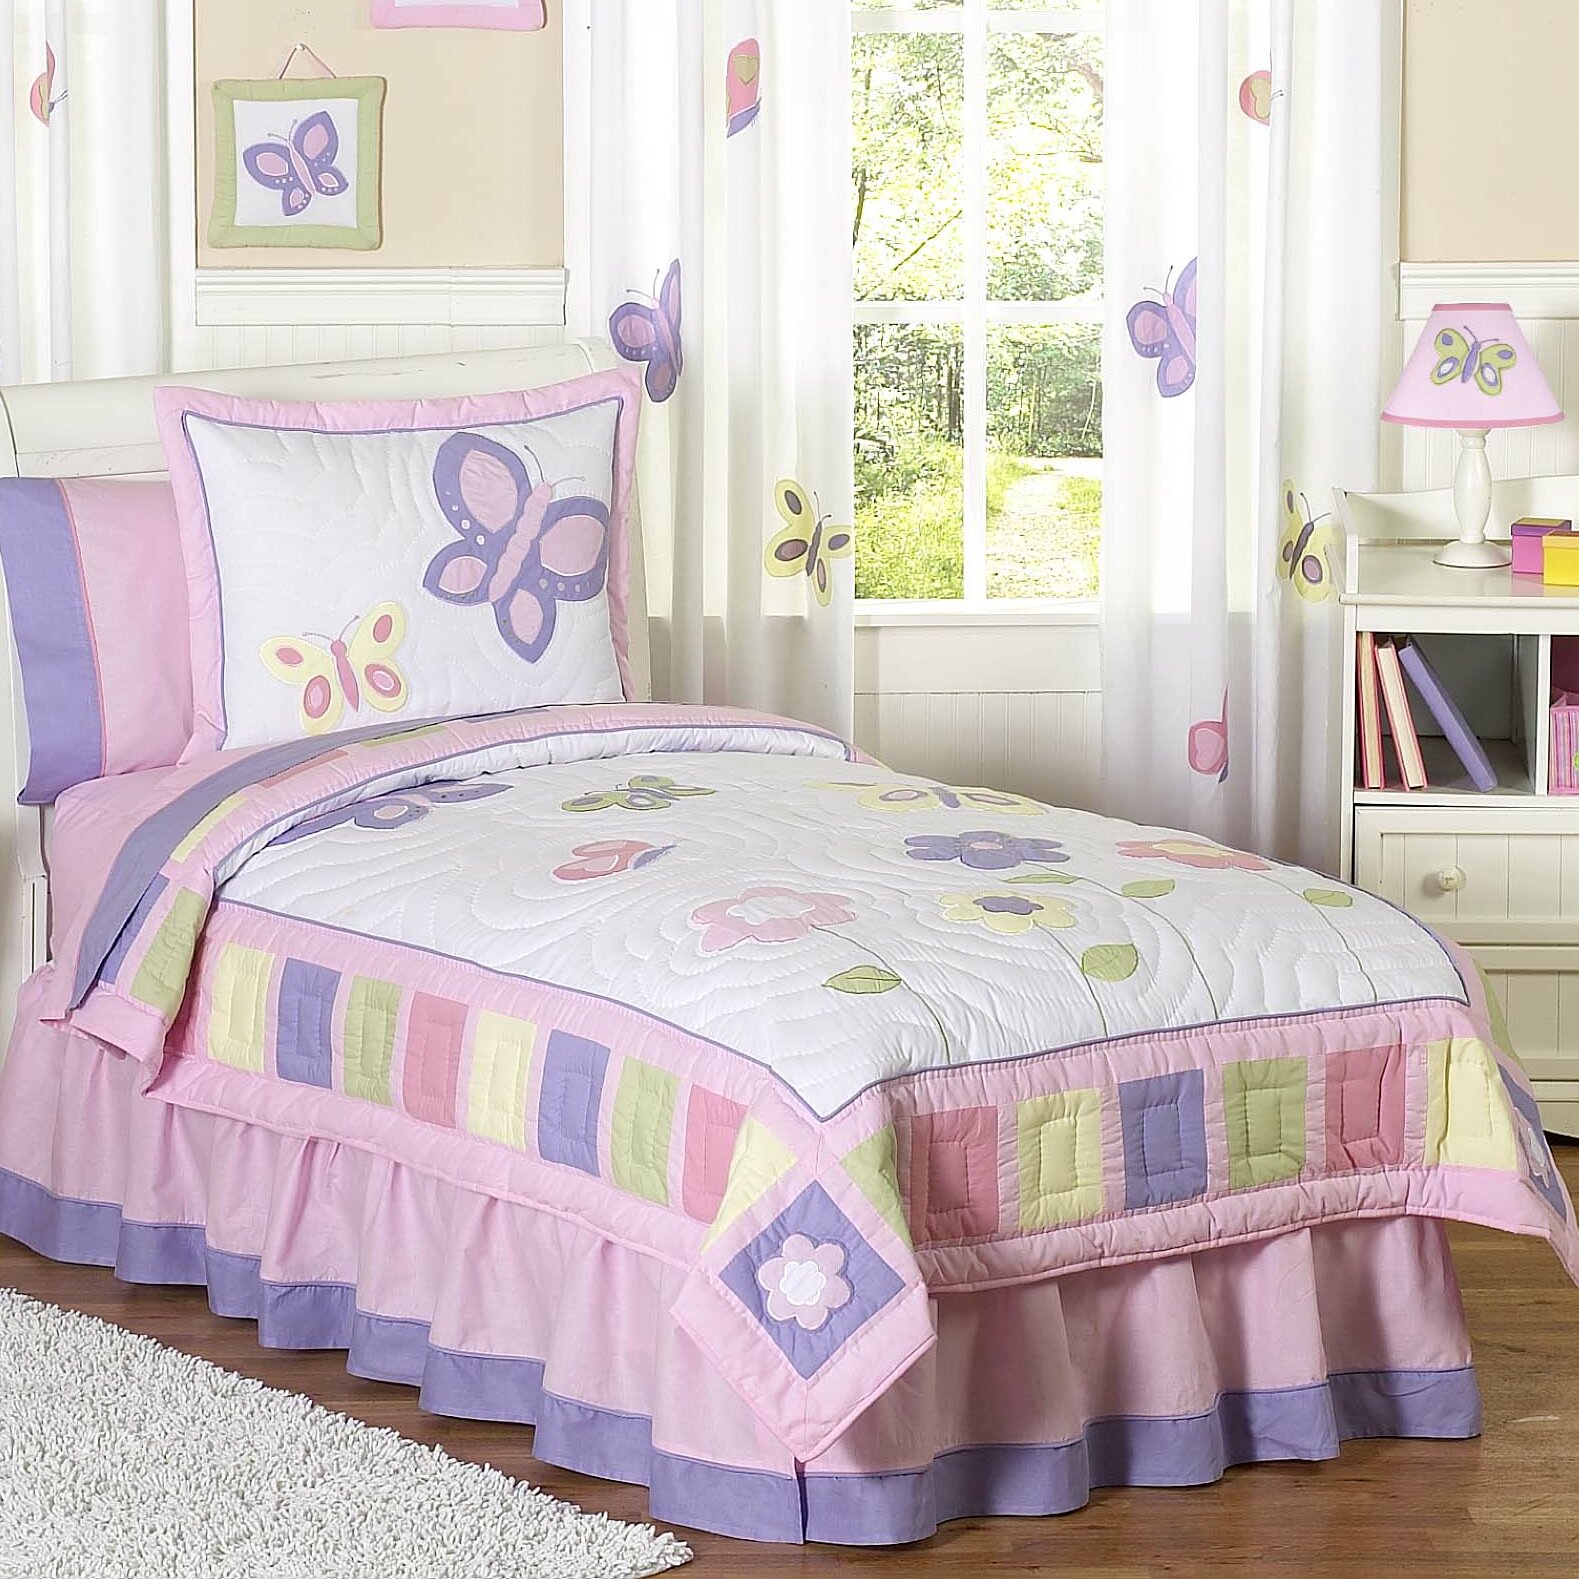 pink twin xl comforter sets